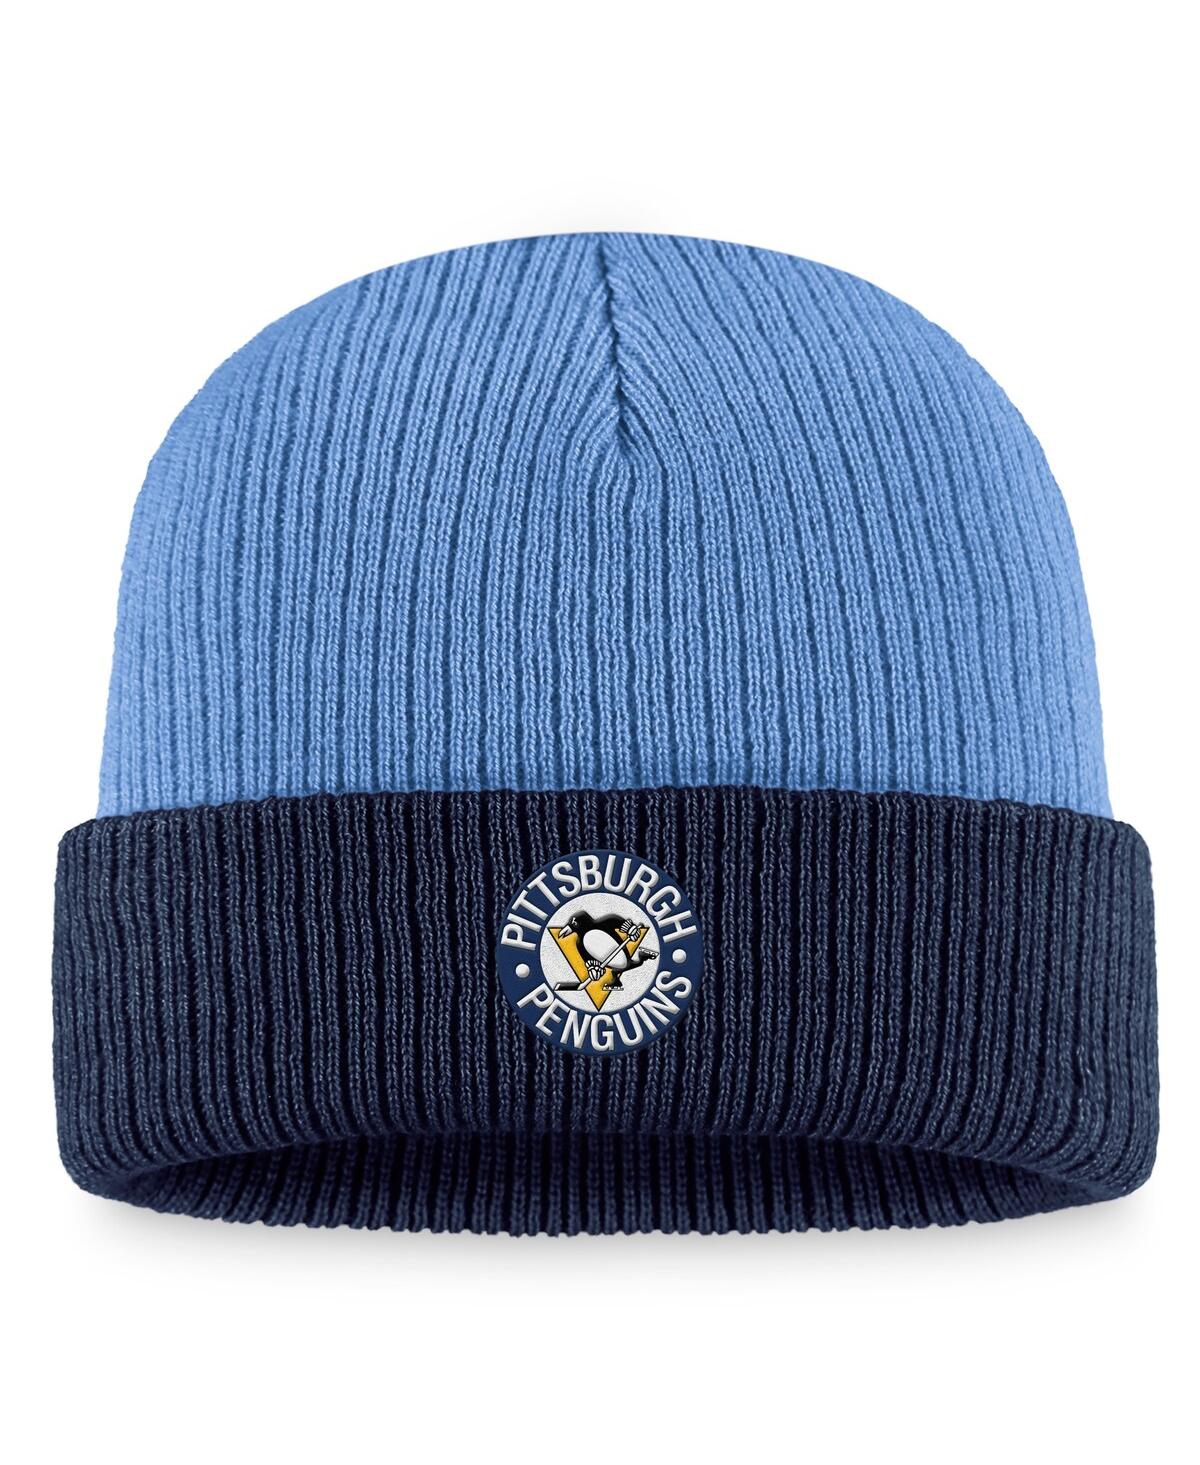 Fanatics Men's  Light Blue, Navy Distressed Pittsburgh Penguins Heritage Vintage-like Cuffed Knit Hat In Light Blue,navy